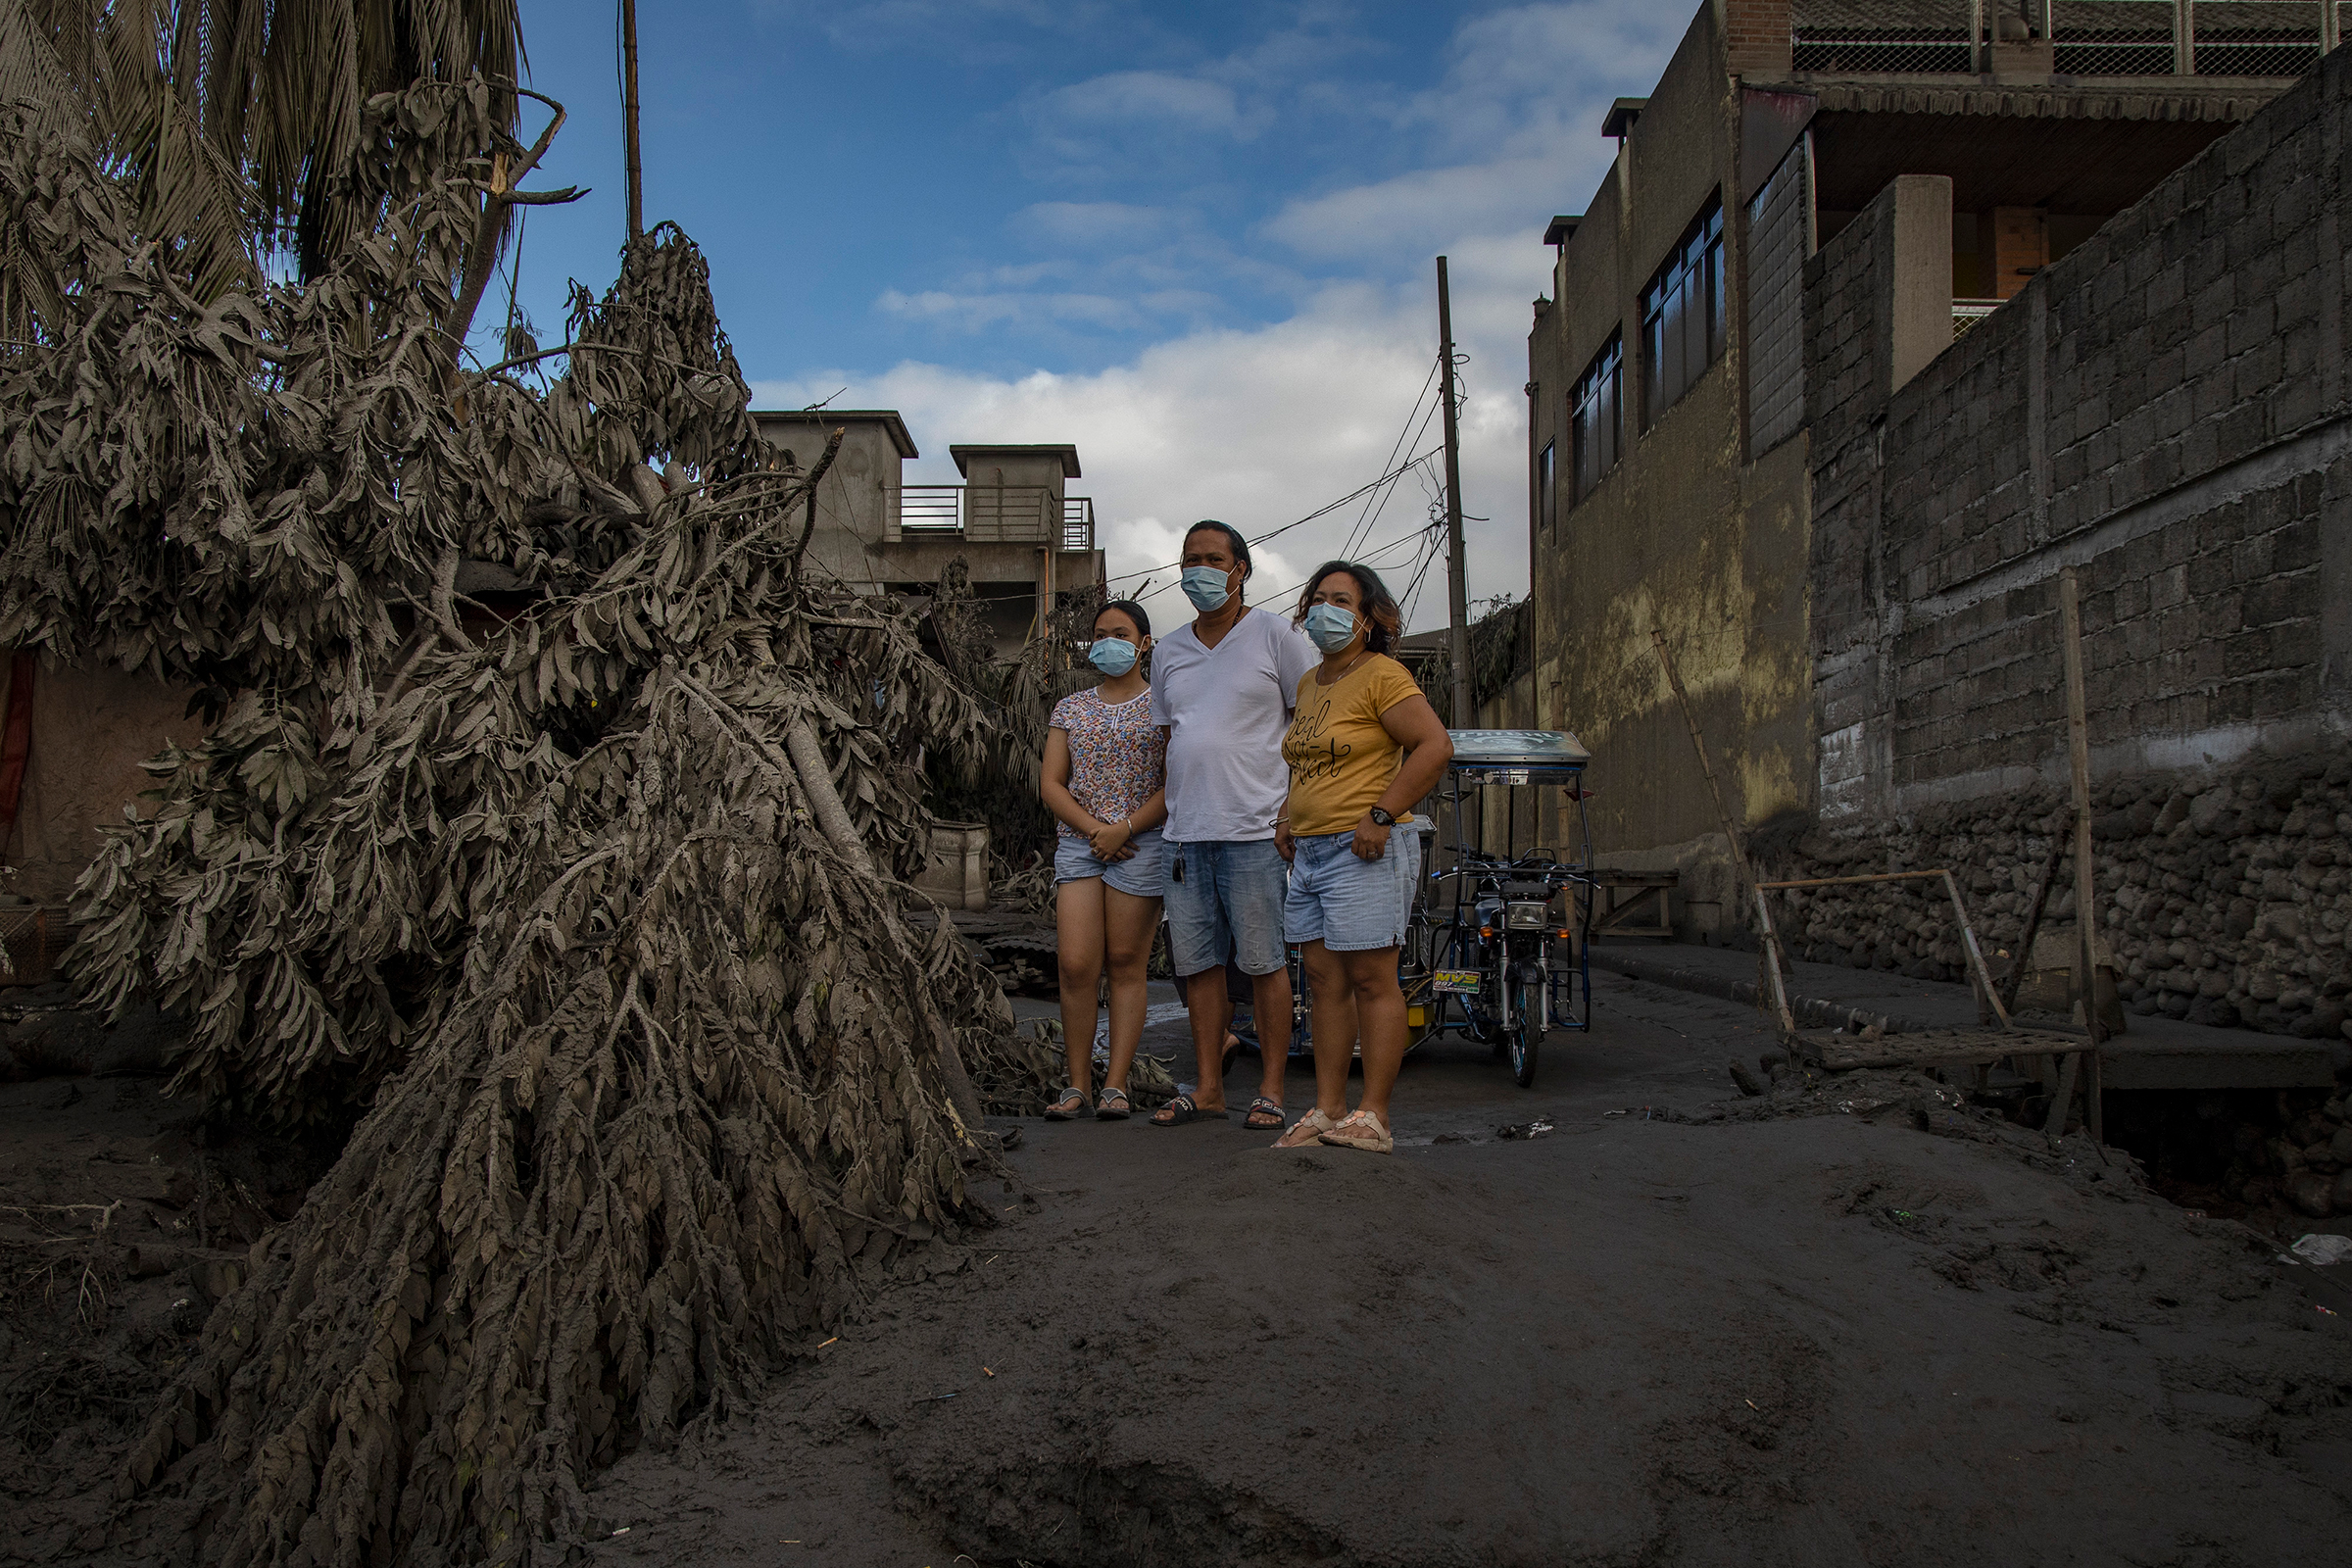 Residents return to their homes covered in ash in Talisay on Jan. 14. (Ezra Acayan—Getty Images)